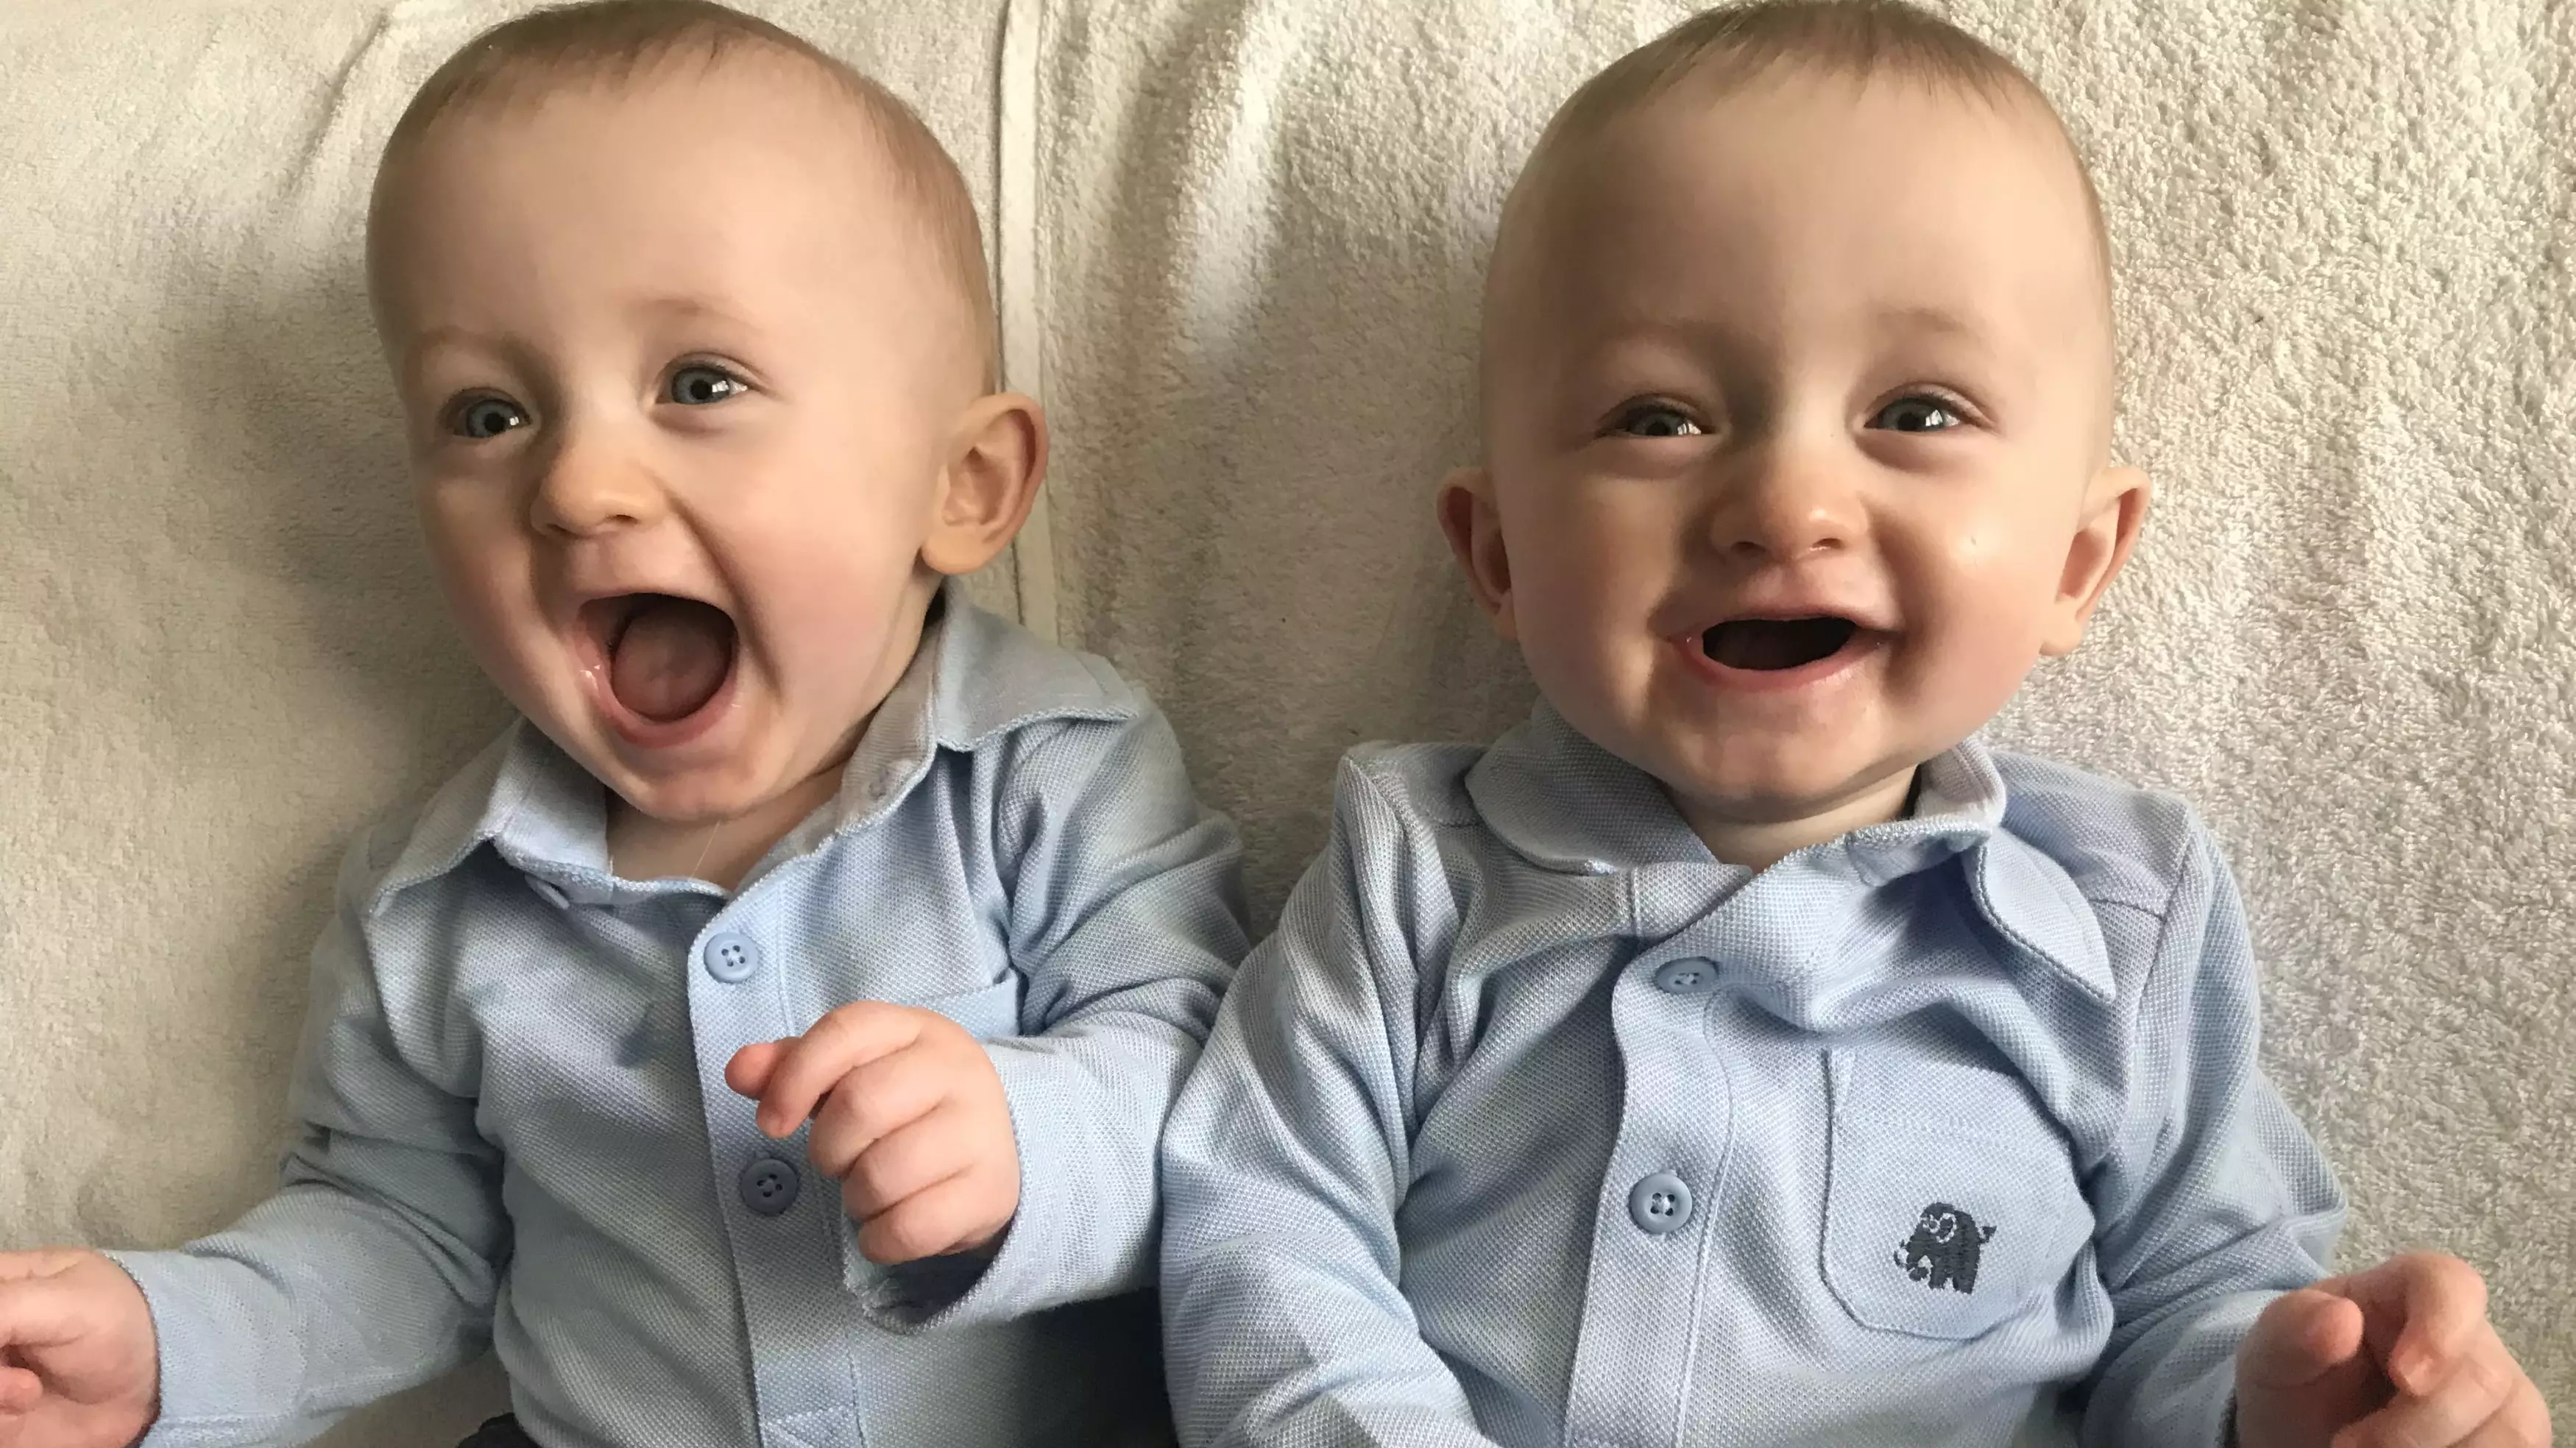 Mum Catches Her Twin Boys Hugging Before Going Down For Their Afternoon Nap